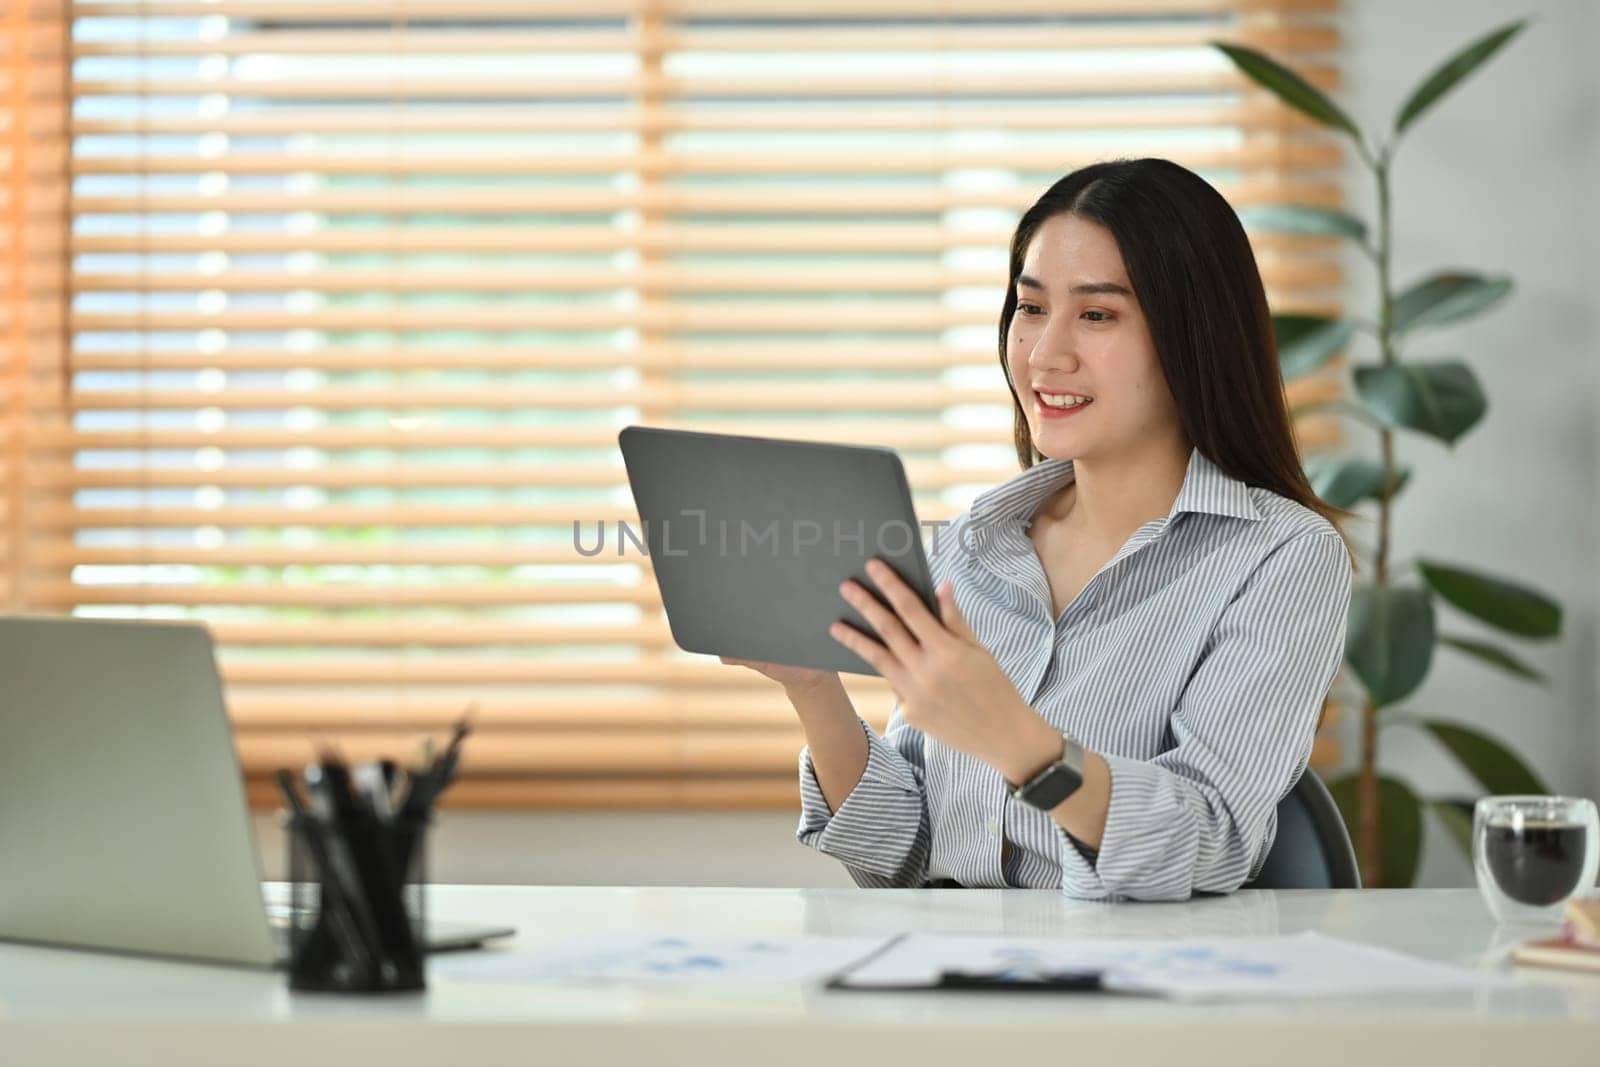 Smiling millennial woman reading email or checking daily routine on digital tablet, sitting in modern home office.